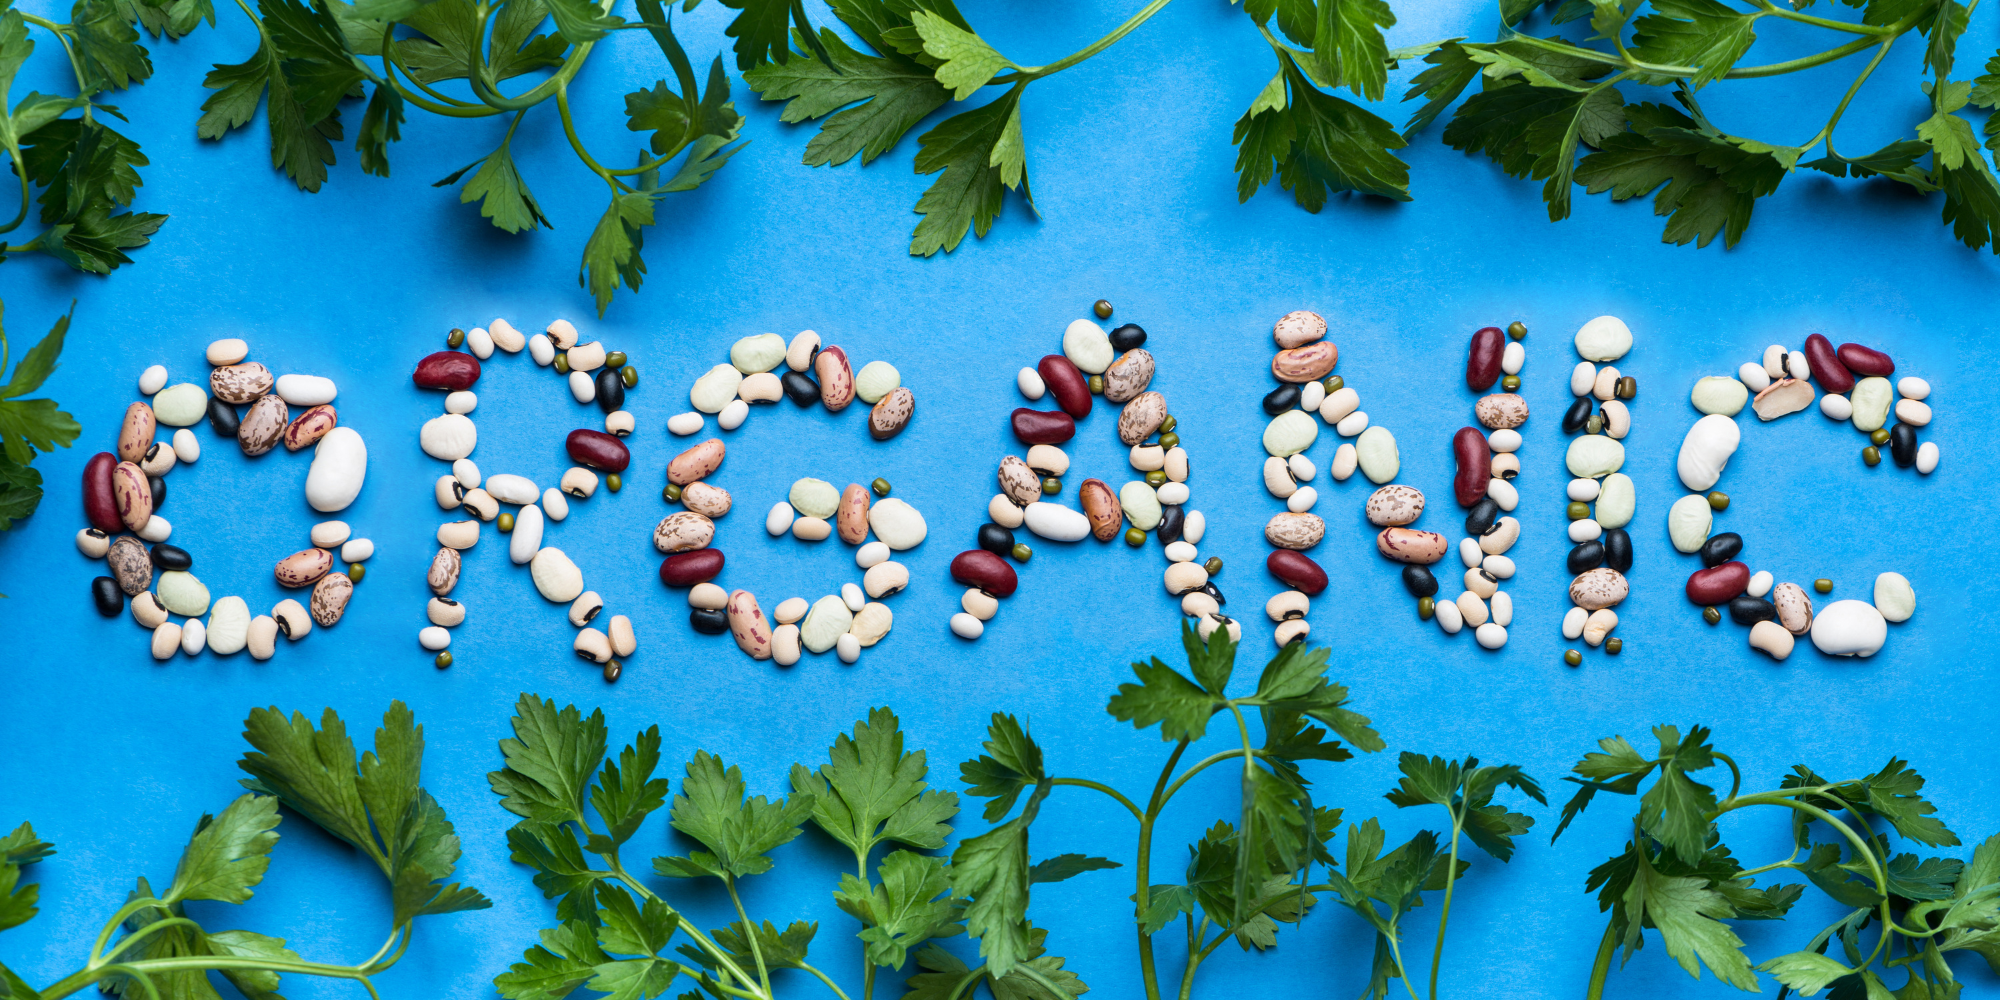 Against a sky blue background, multi colored (earth toned) beans are arranged to spell the word 